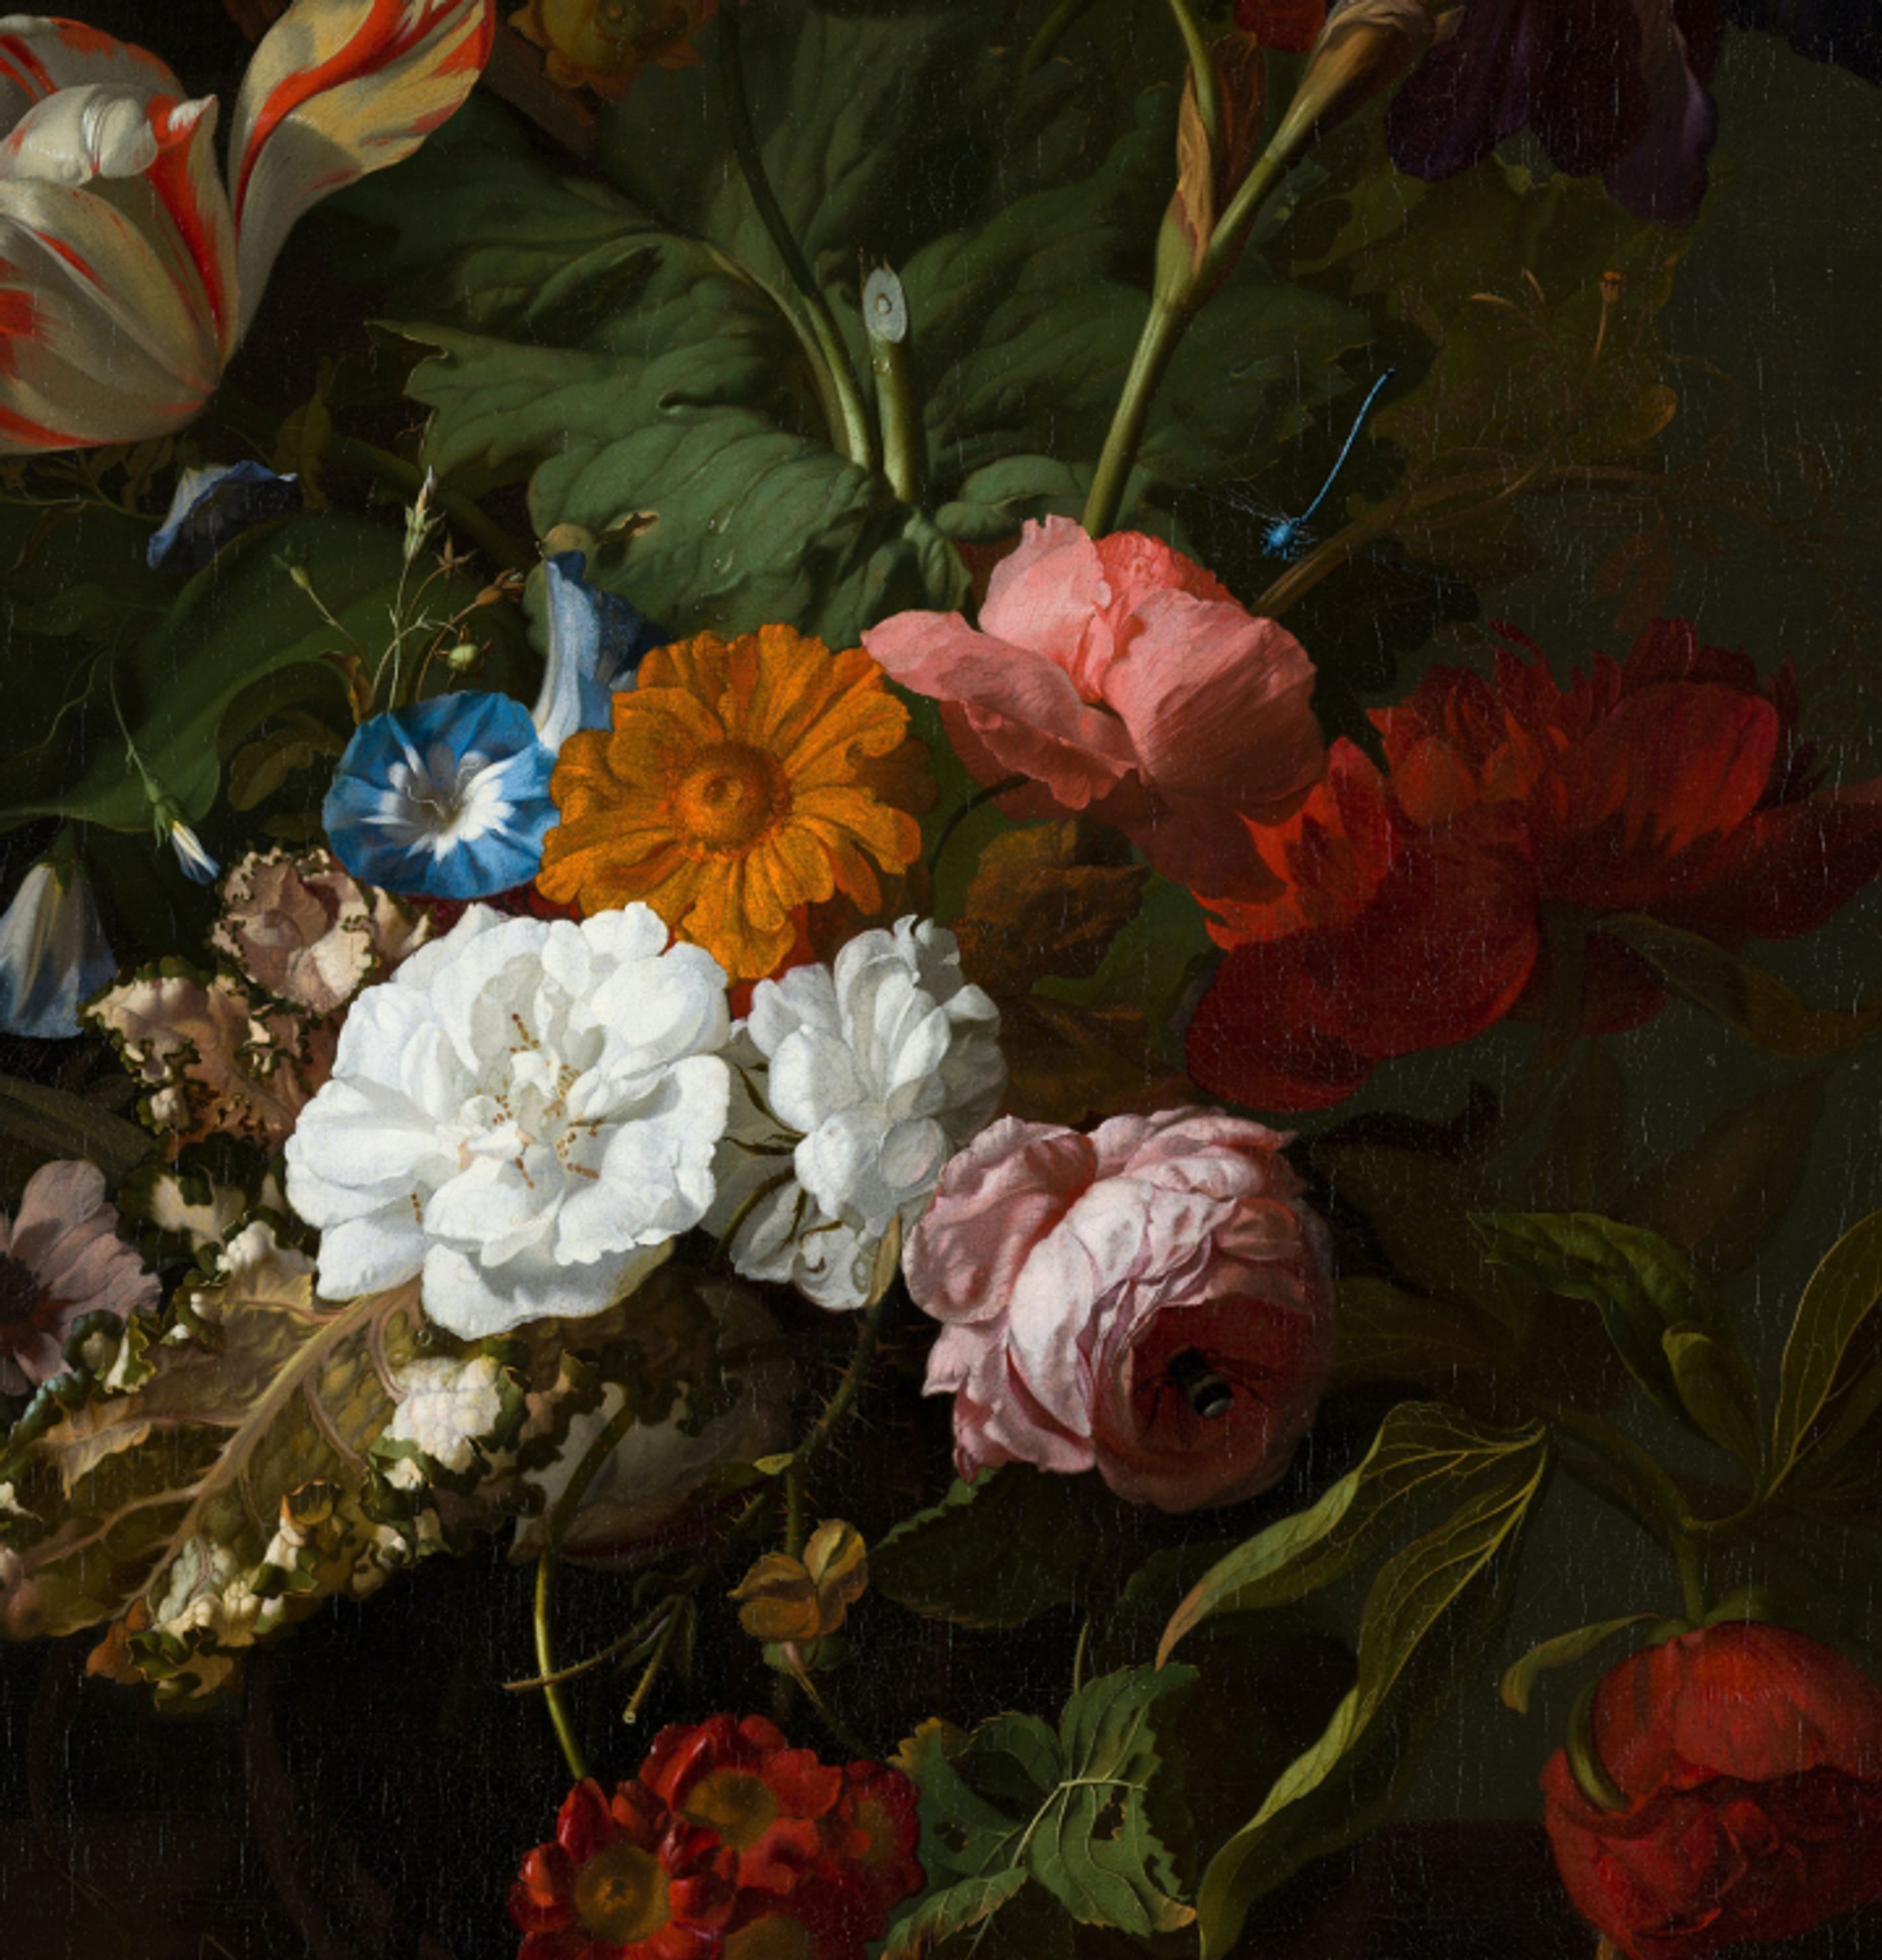 A painting of a bouquet of flowers